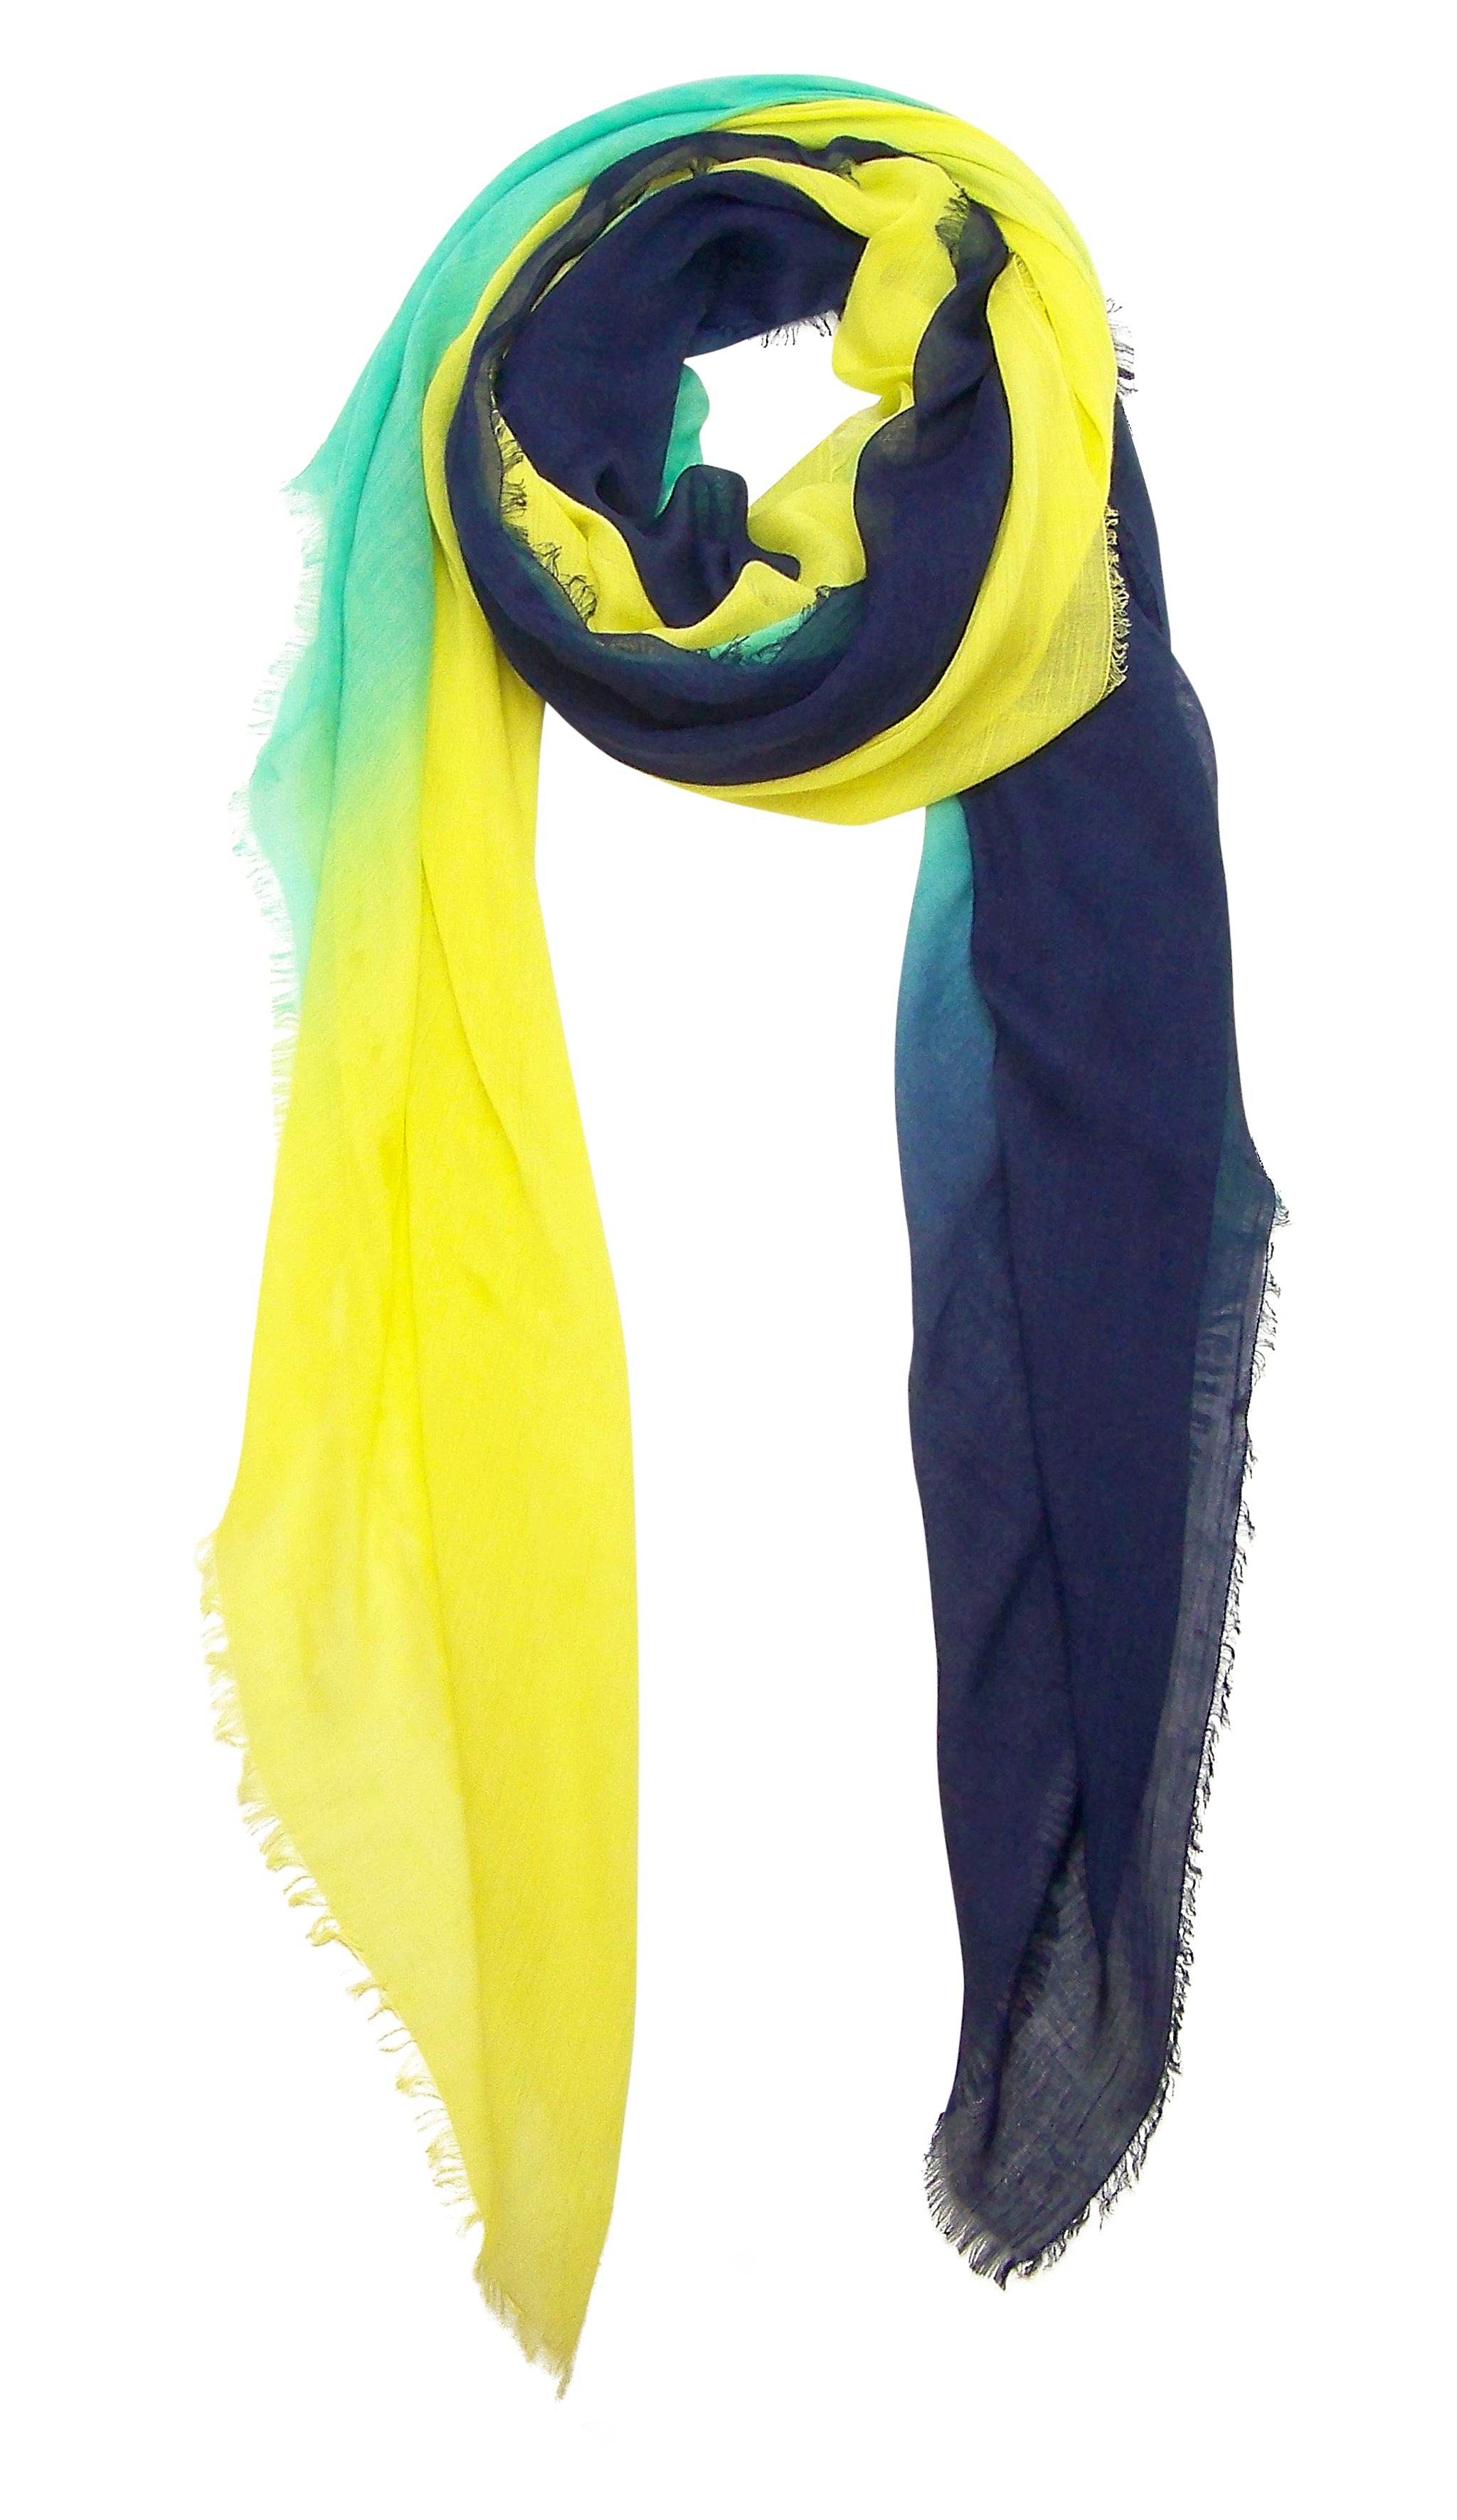 Primary Rolled Blue Pacific Dream Cashmere and Silk Scarf in Navy Bright Turquoise Yellow